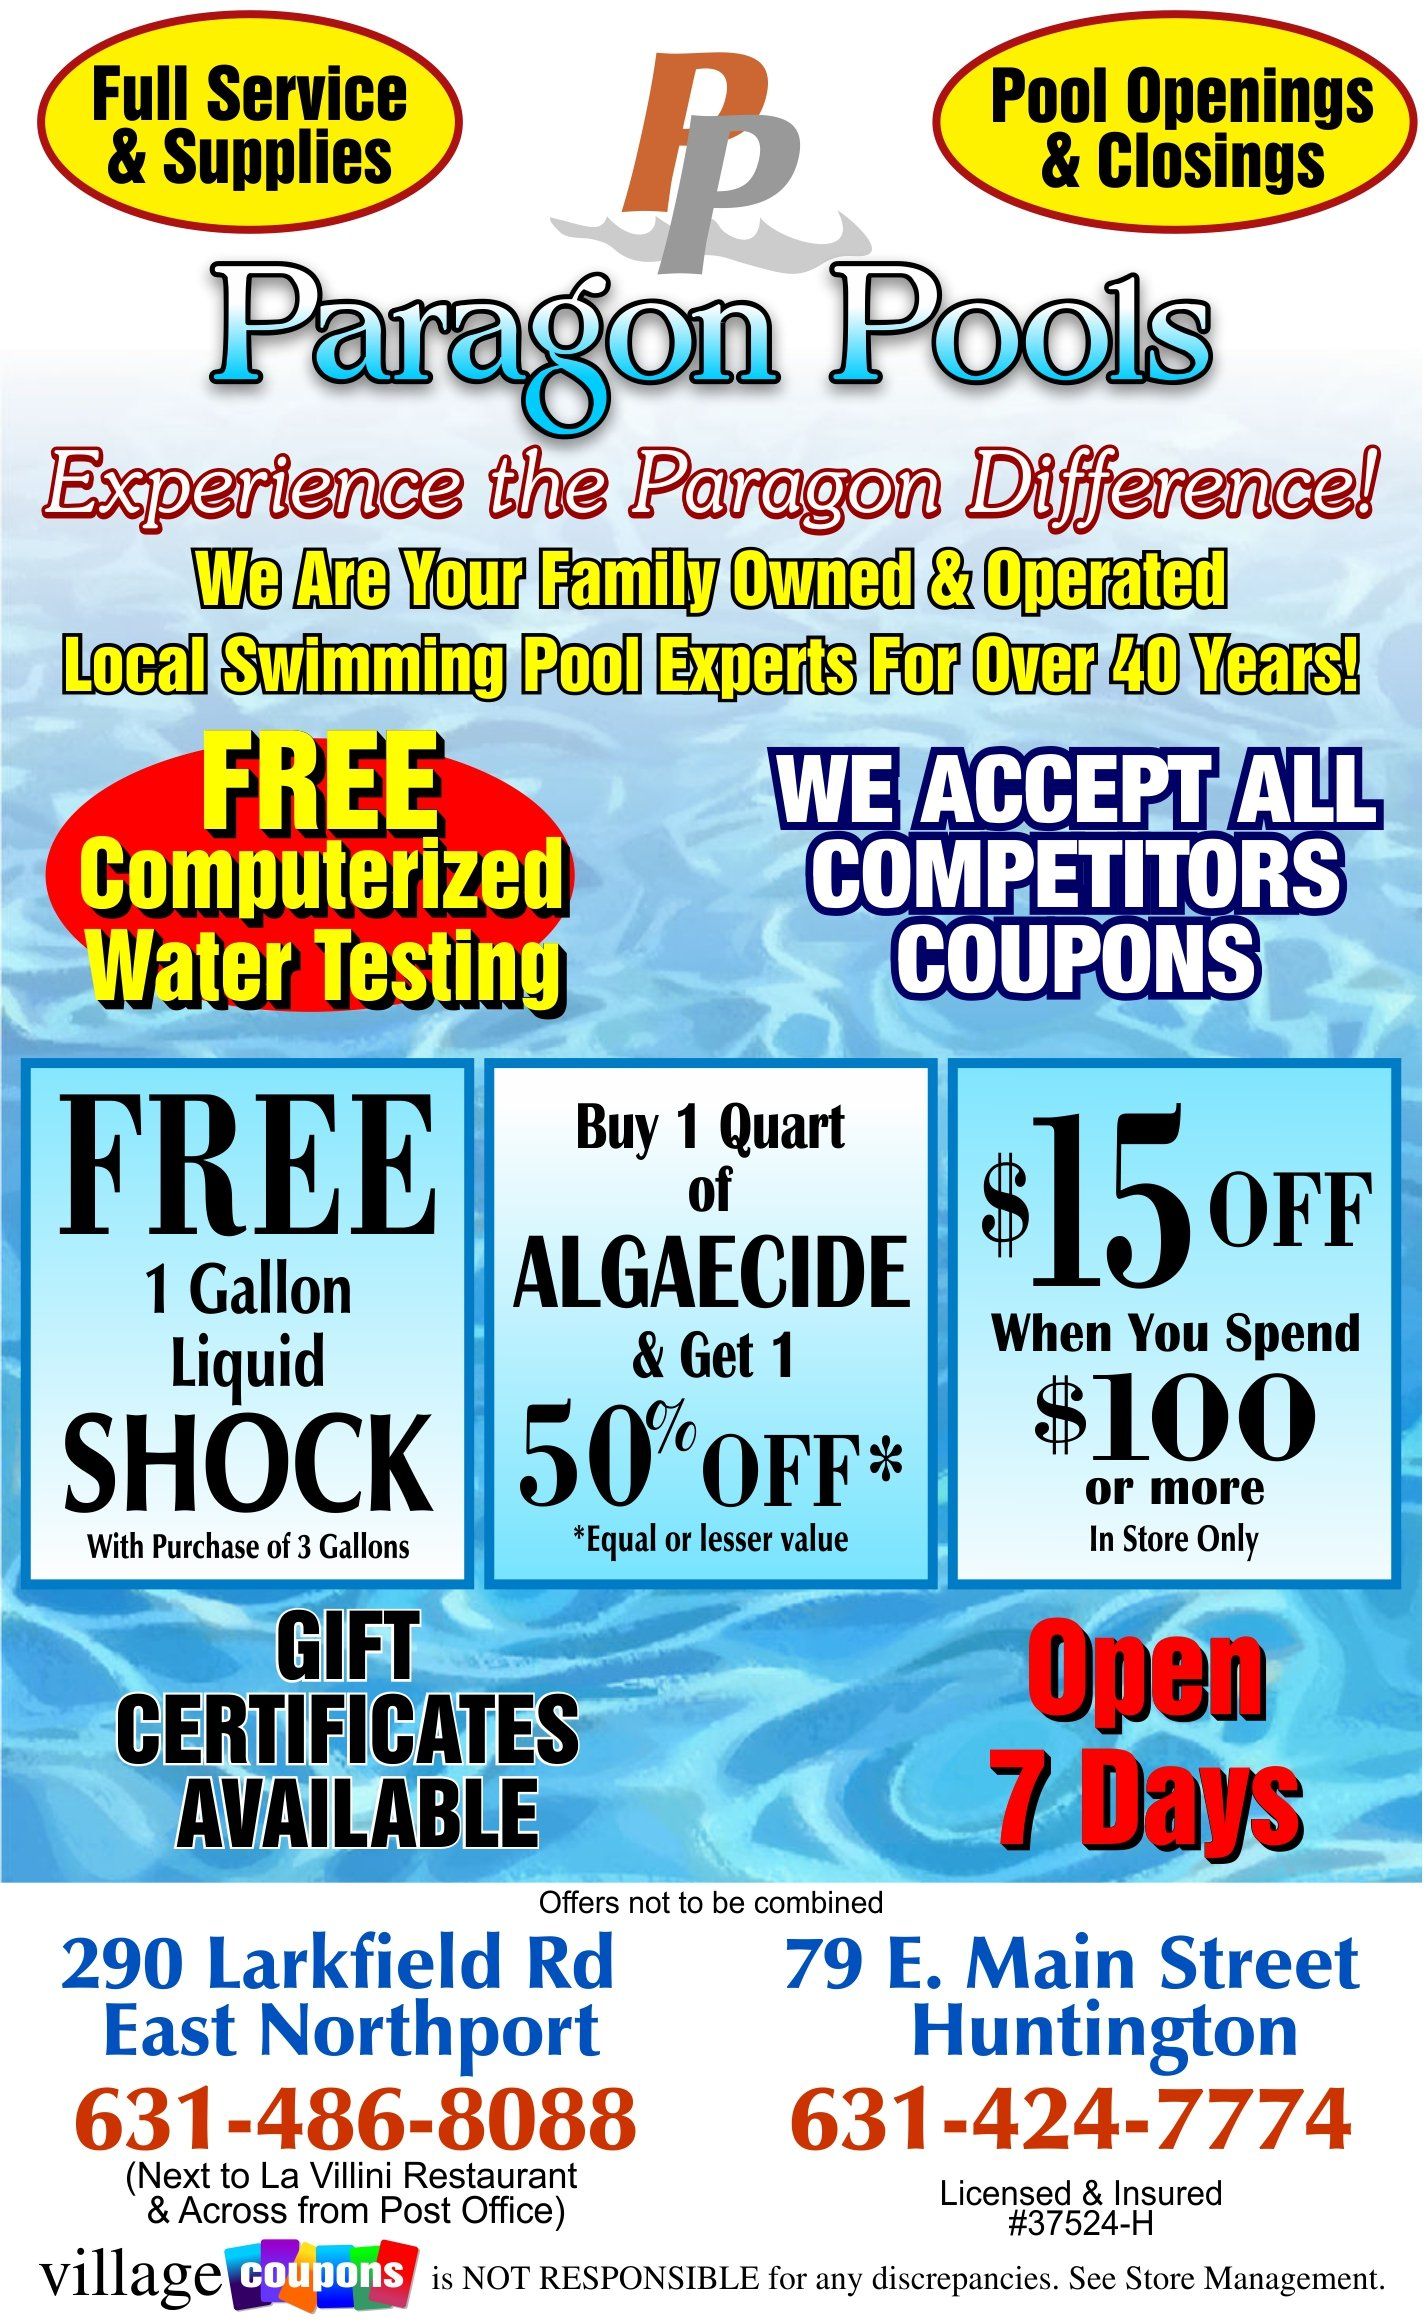 A flyer for paragon pools advertises free complimentized water testing